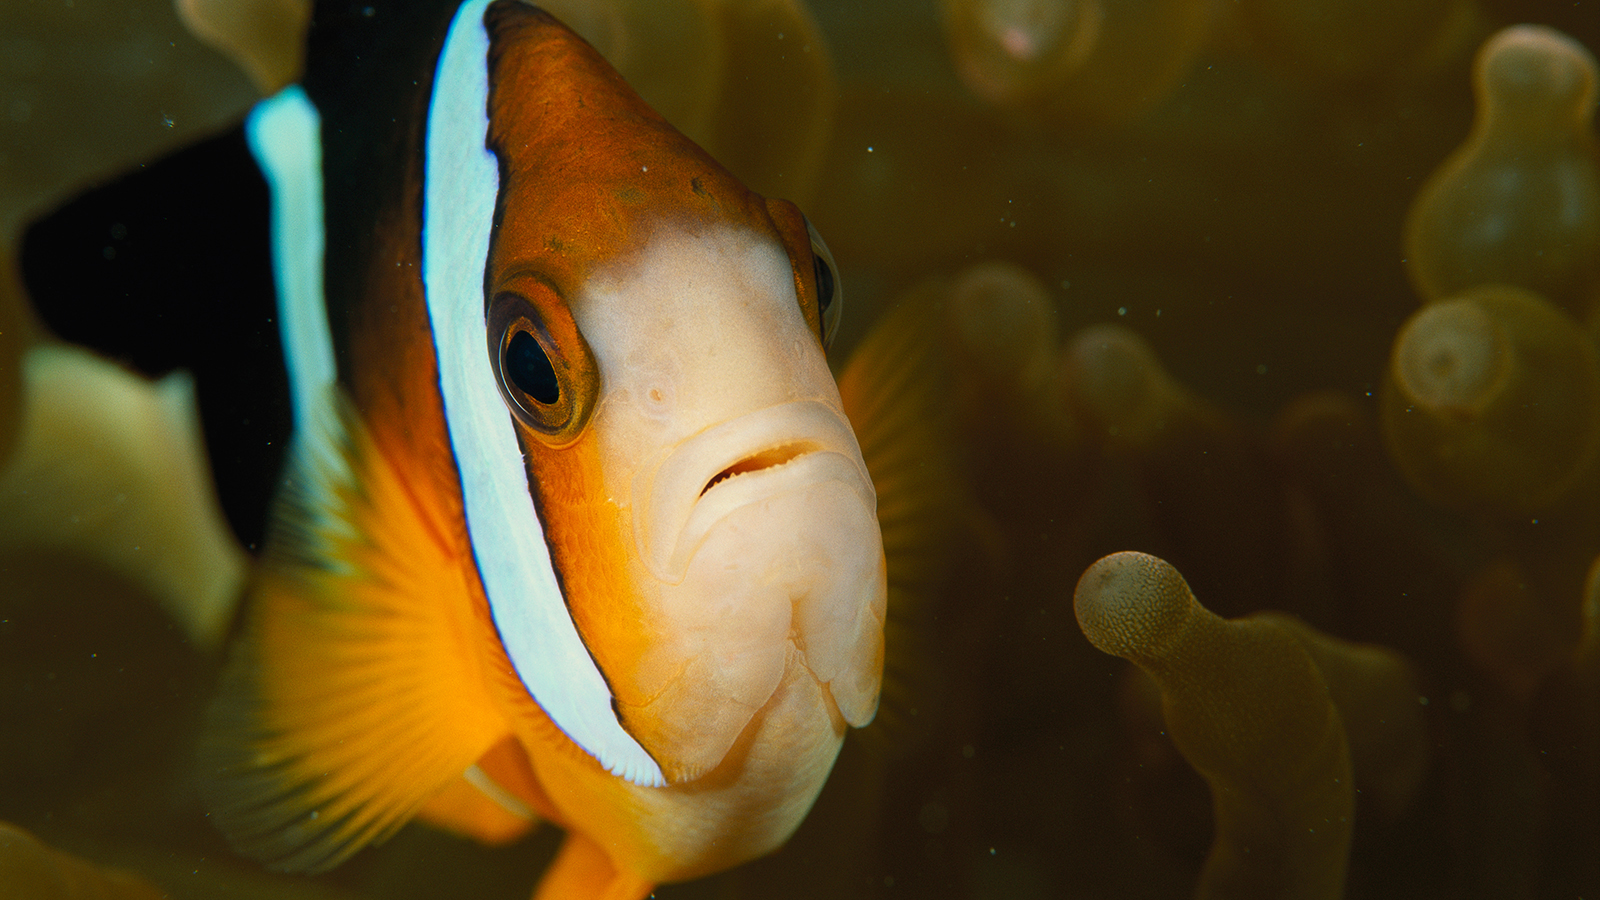 A clown anemonefish among the stinging tentacles of a sea anemone.